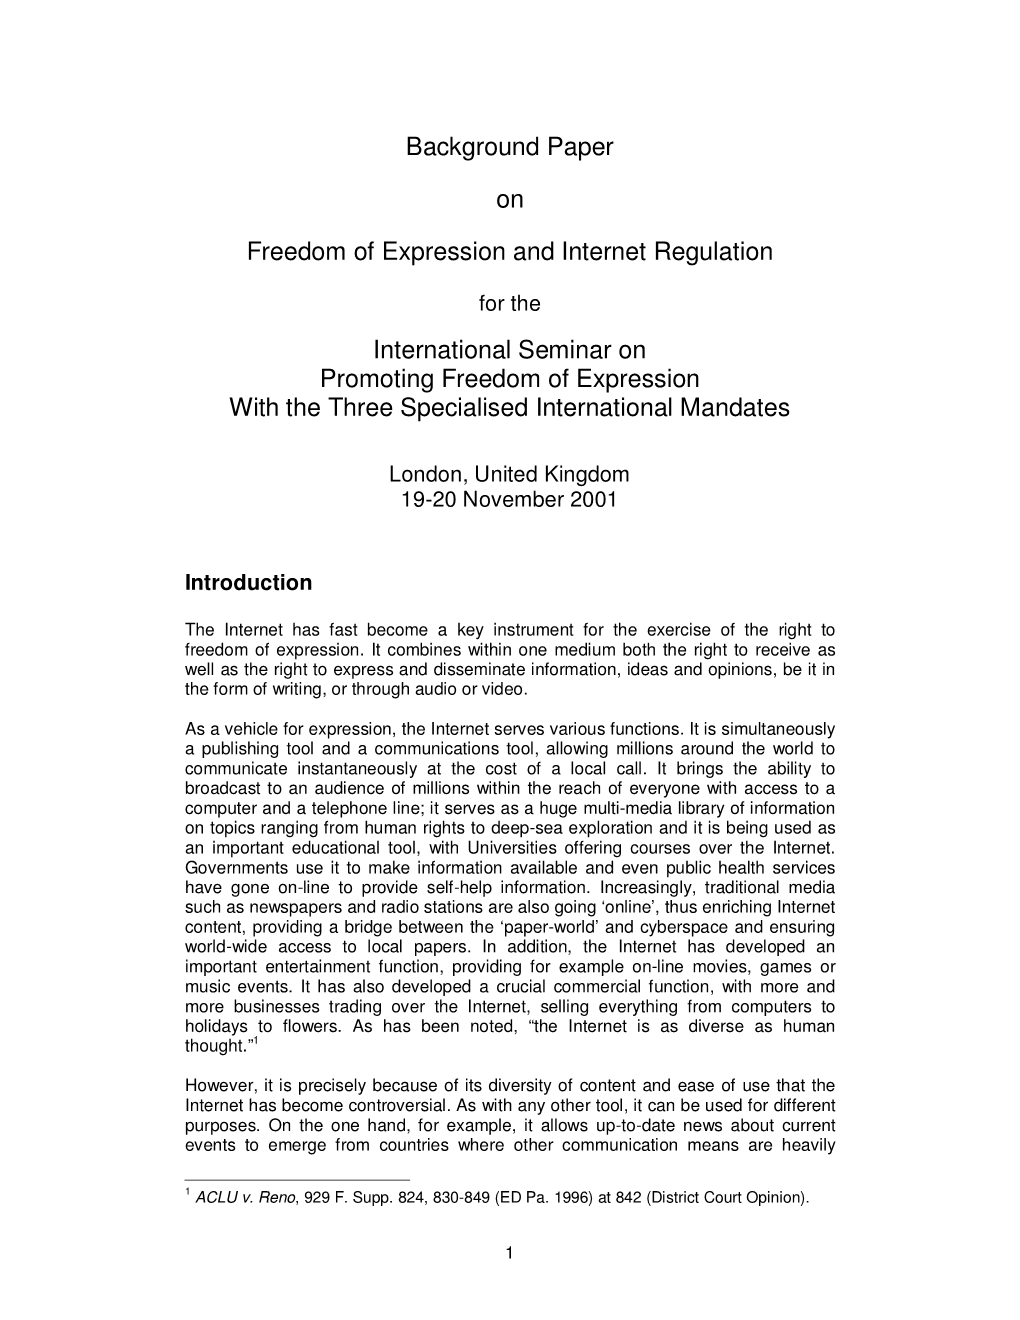 Background Paper on Freedom of Expression and Internet Regulation